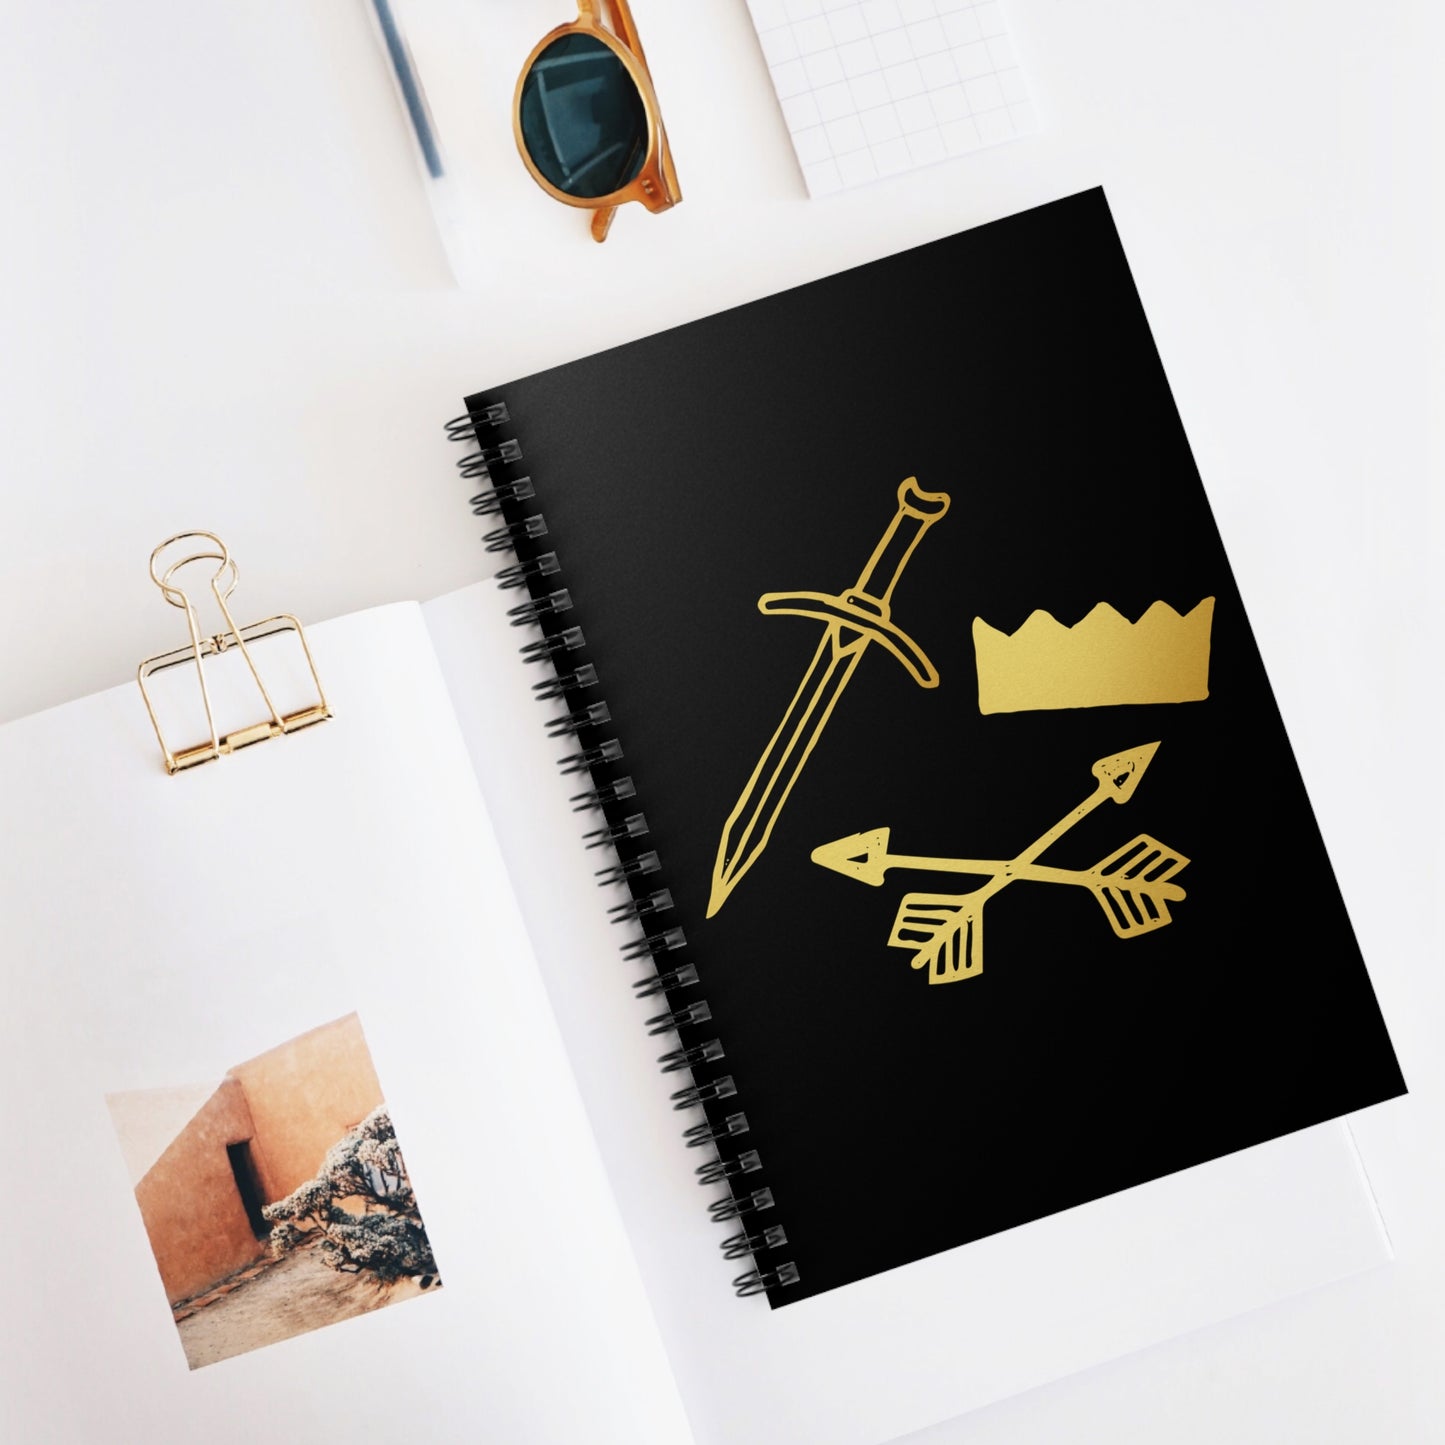 Spiral Notebook - Ruled Line (Gold and Bold Warrior)